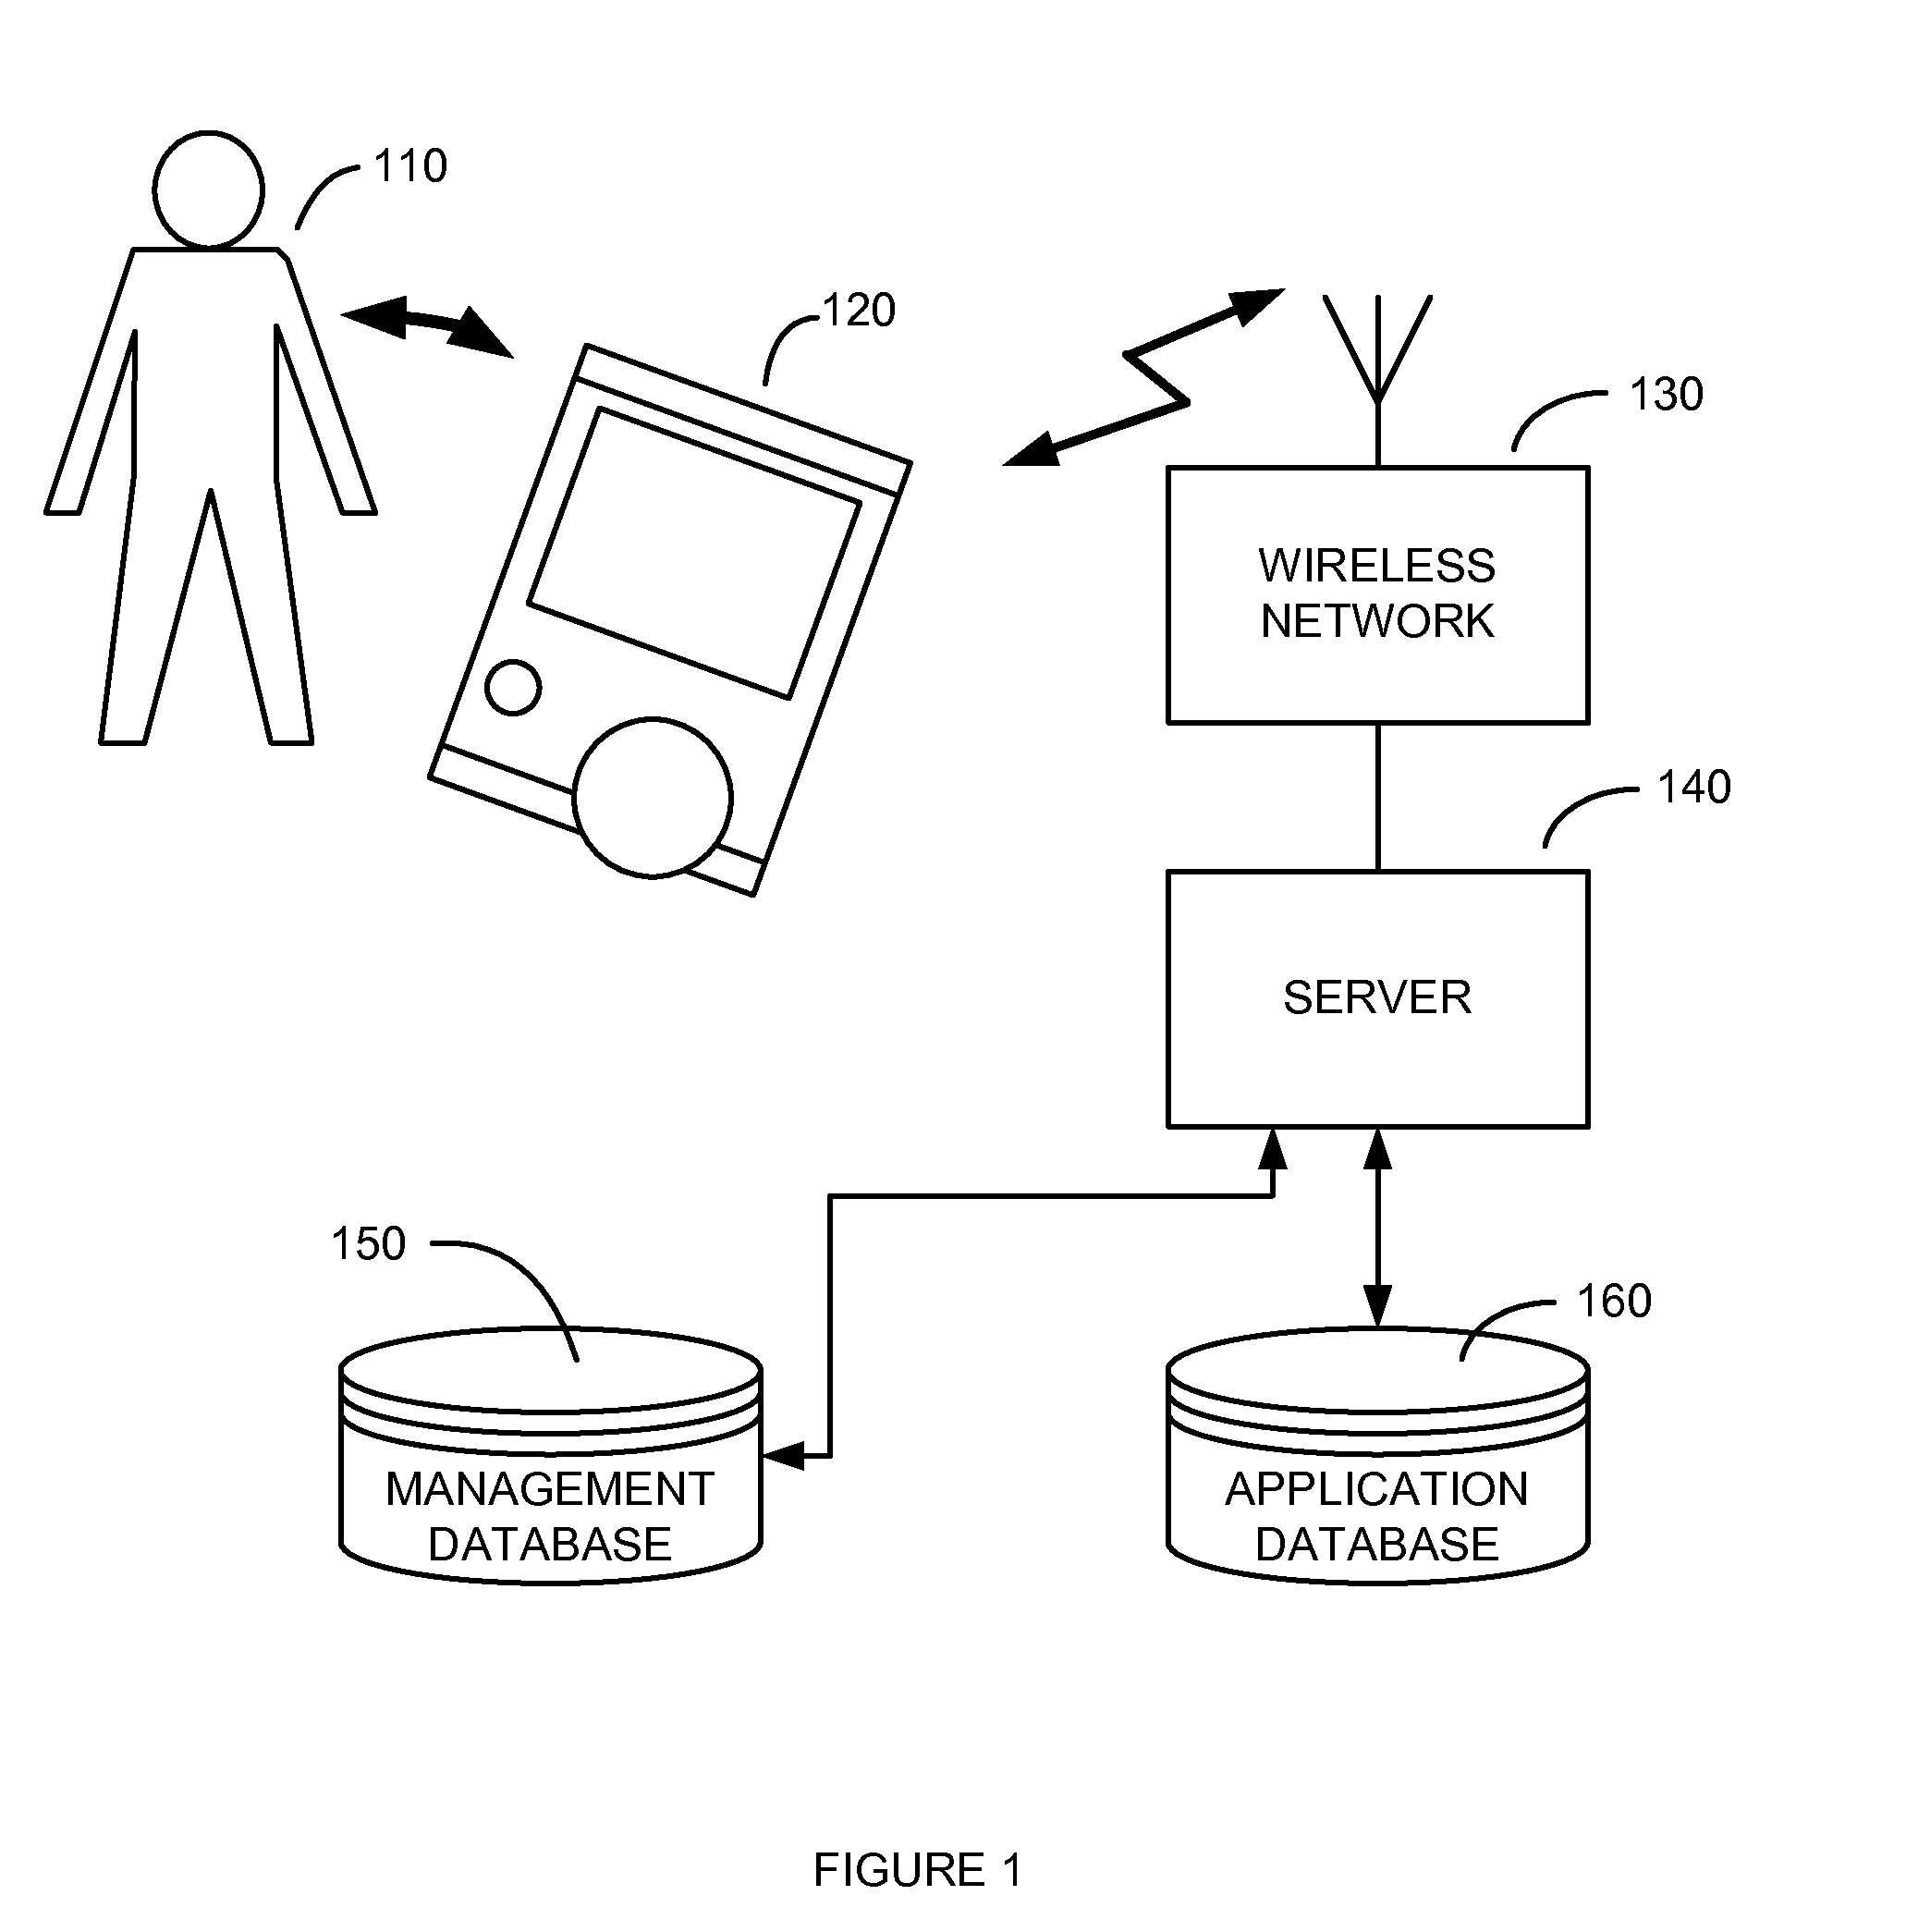 System and Method for Remote Management of Applications Downloaded to a Personal Portable Wireless Appliance